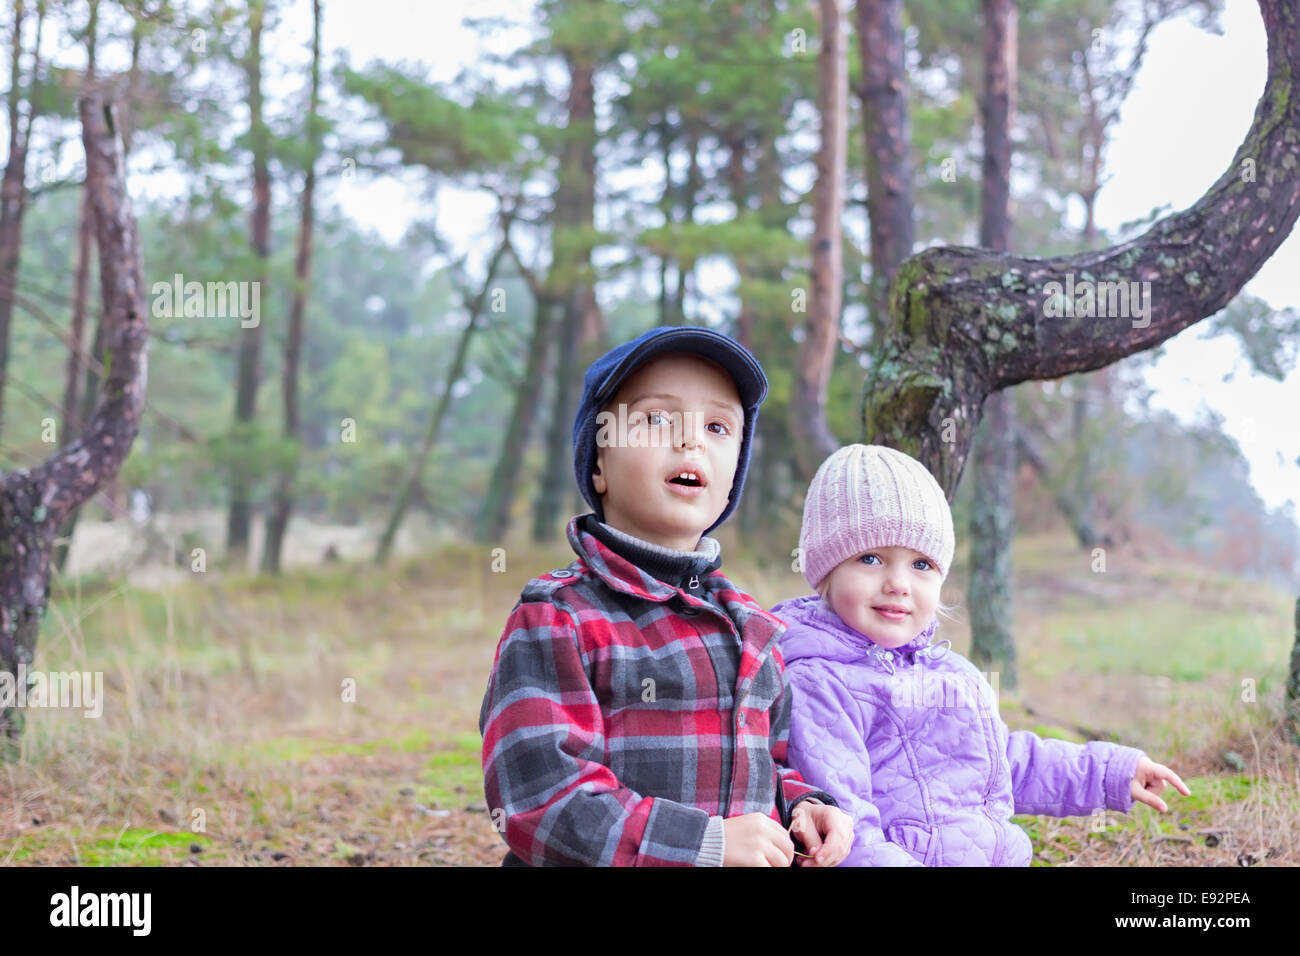 children nature outdoor brother sister boy girl Stock Photo